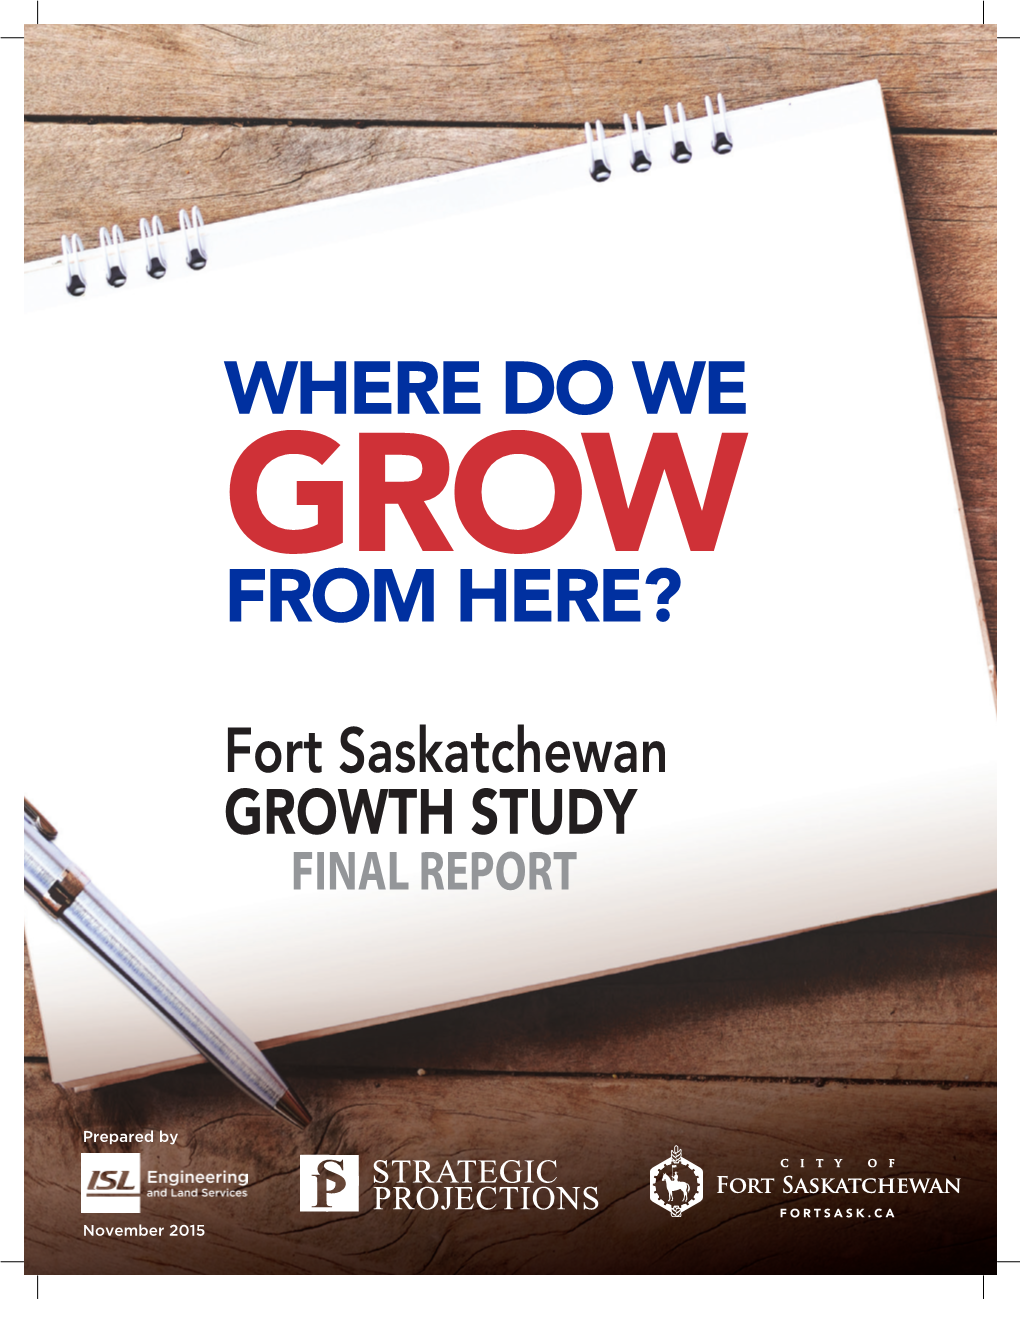 Growth Study Final Report